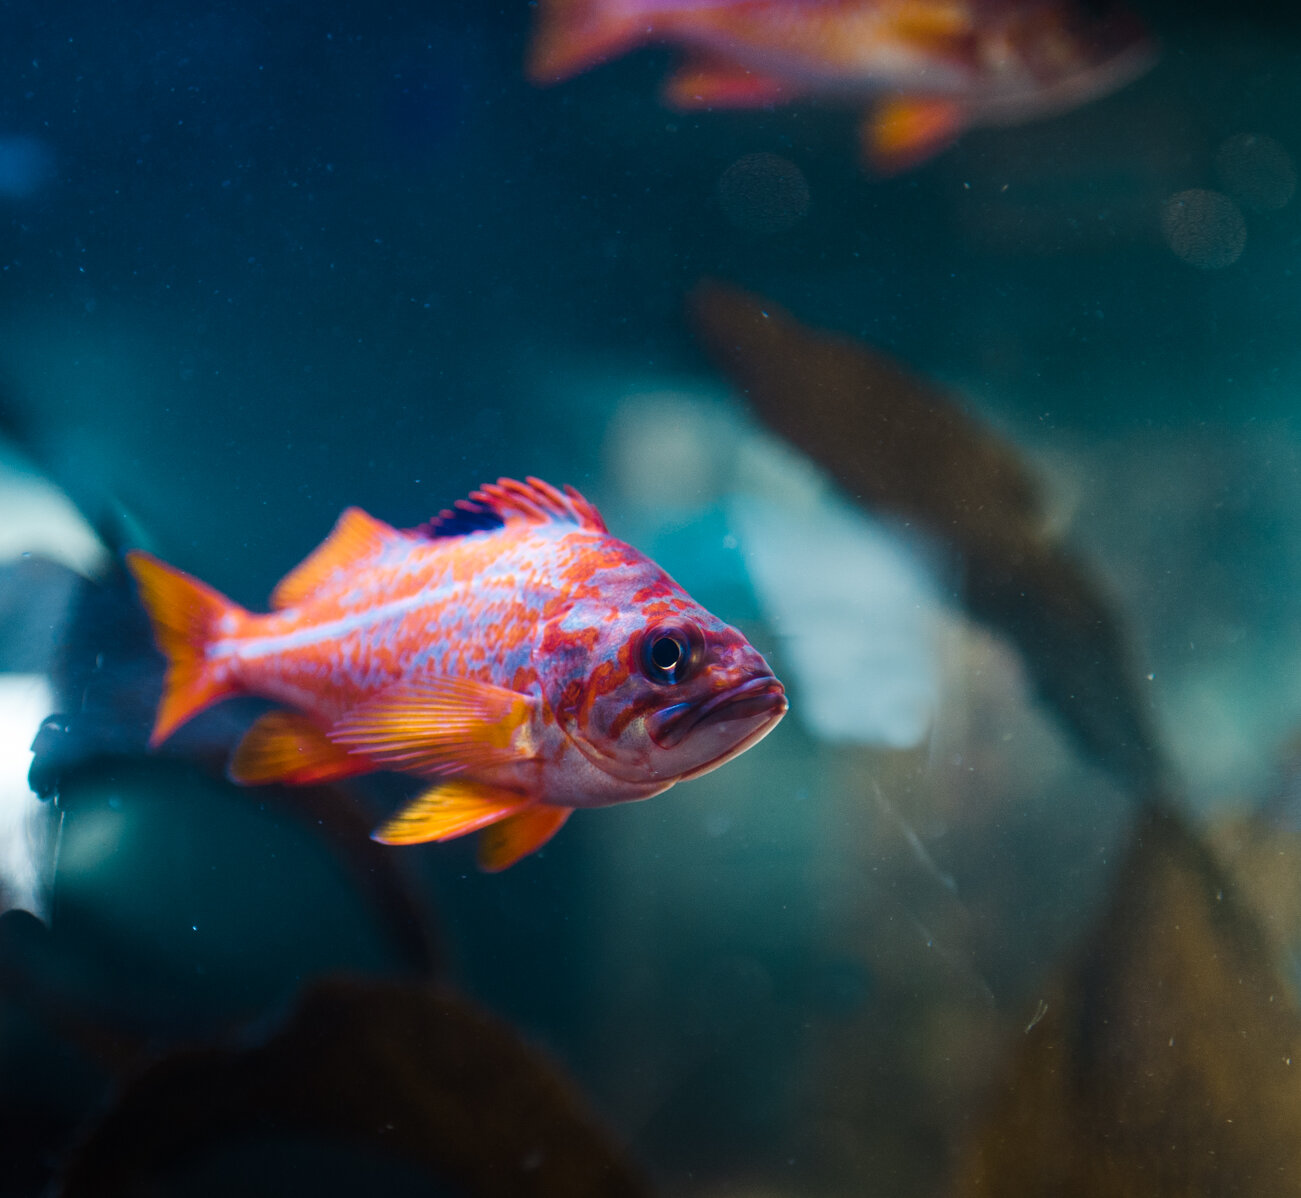 Colourful fish in a tank